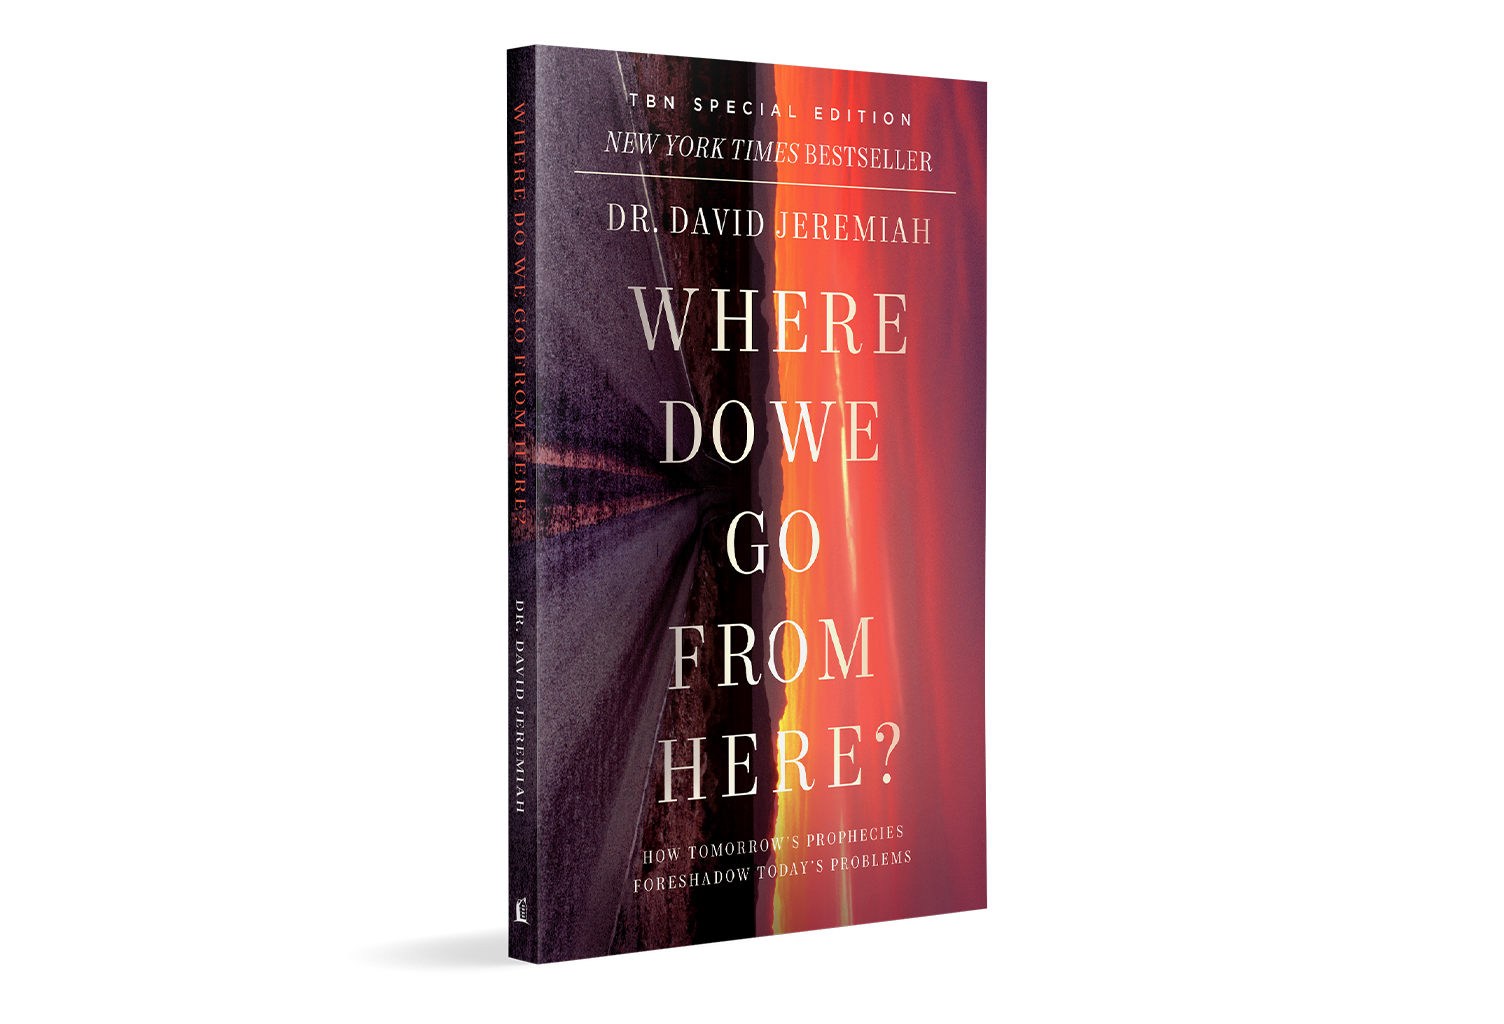 Where Do We Go from Here? How Tomorrow’s Prophecies Foreshadow Today’s Problems by Dr. David Jeremiah on TBN